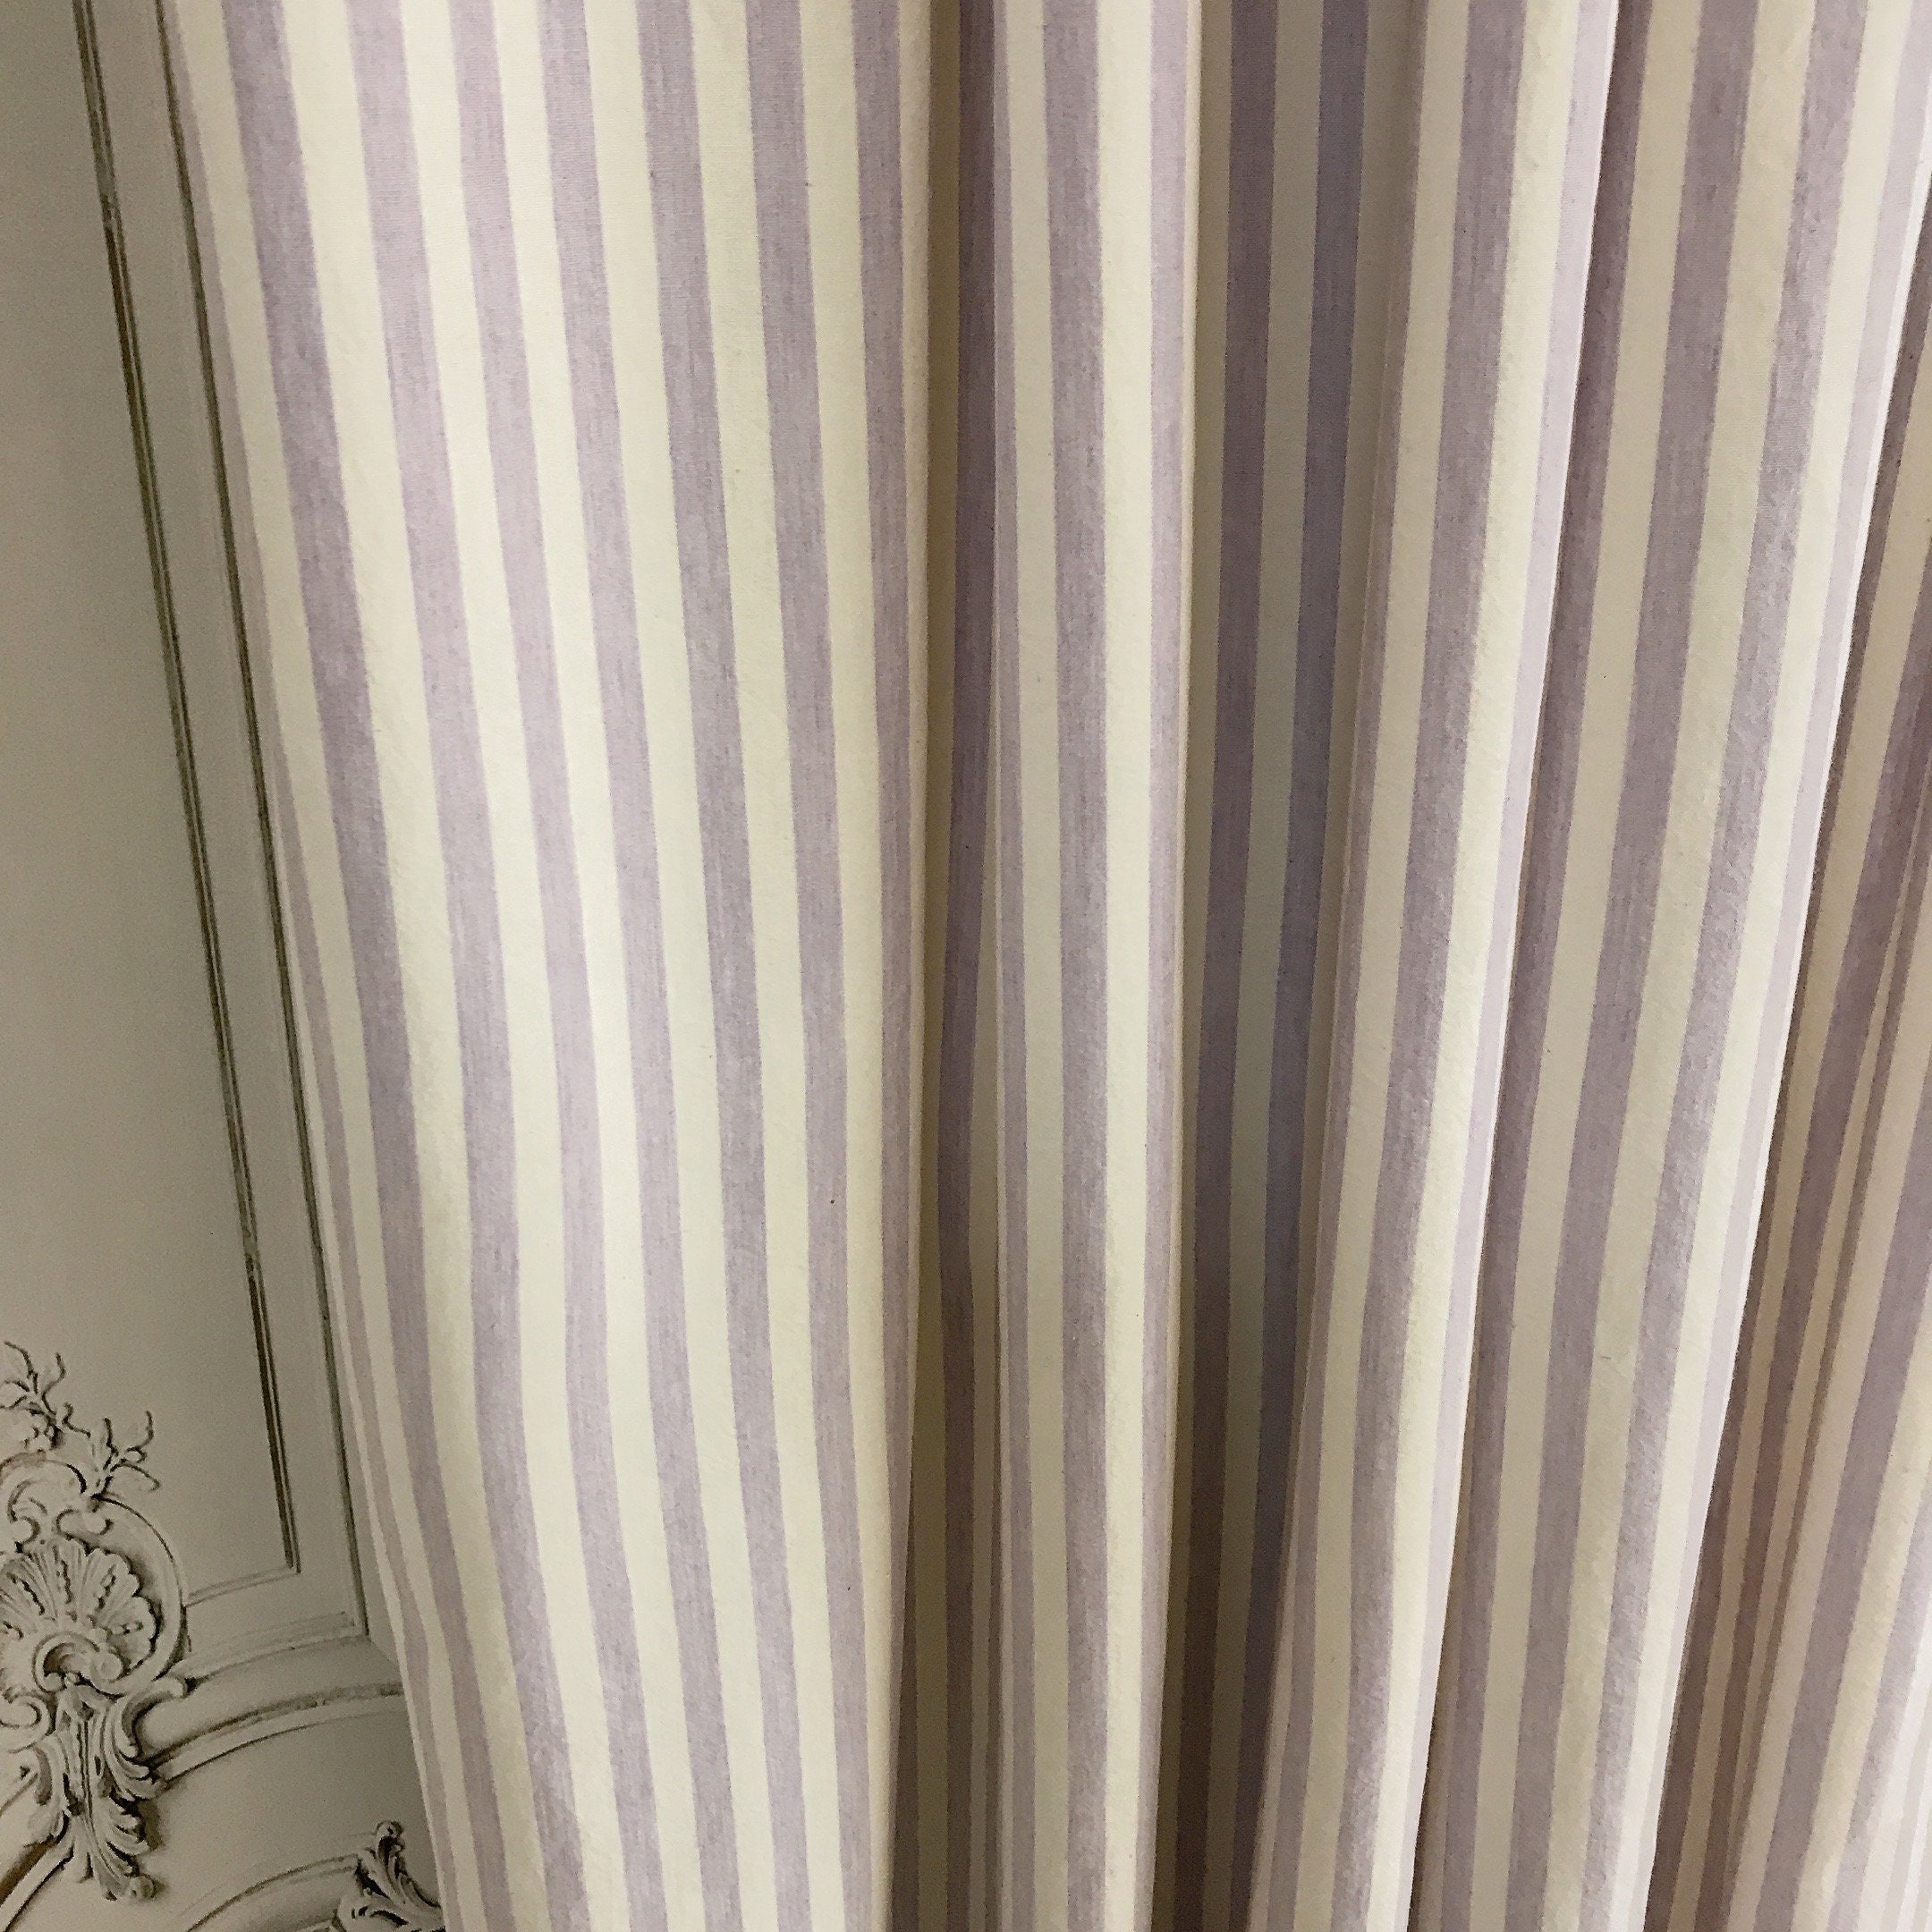 shop price White/ Custom Cream Tone Curtains. Custom USA 6 Curtains  Curtains. Curtains. Options. 4 Pleat Photo Styles. Printed Blackout Lining  Option. Custom Window Drapes for Living Room, Study. Bedroom & Office 